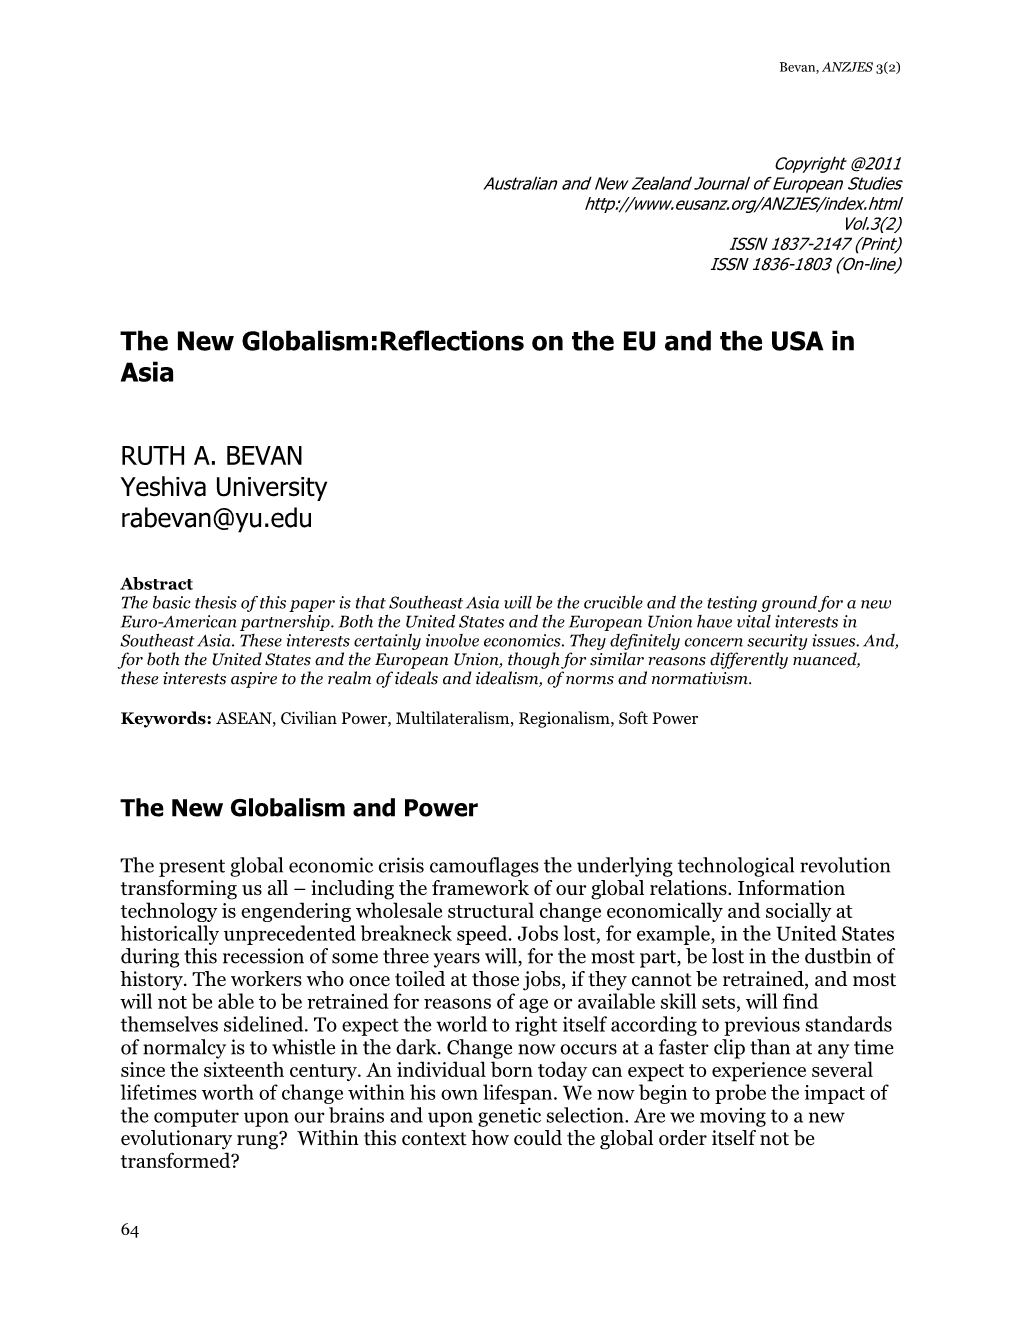 The New Globalism:Reflections on the EU and the USA in Asia